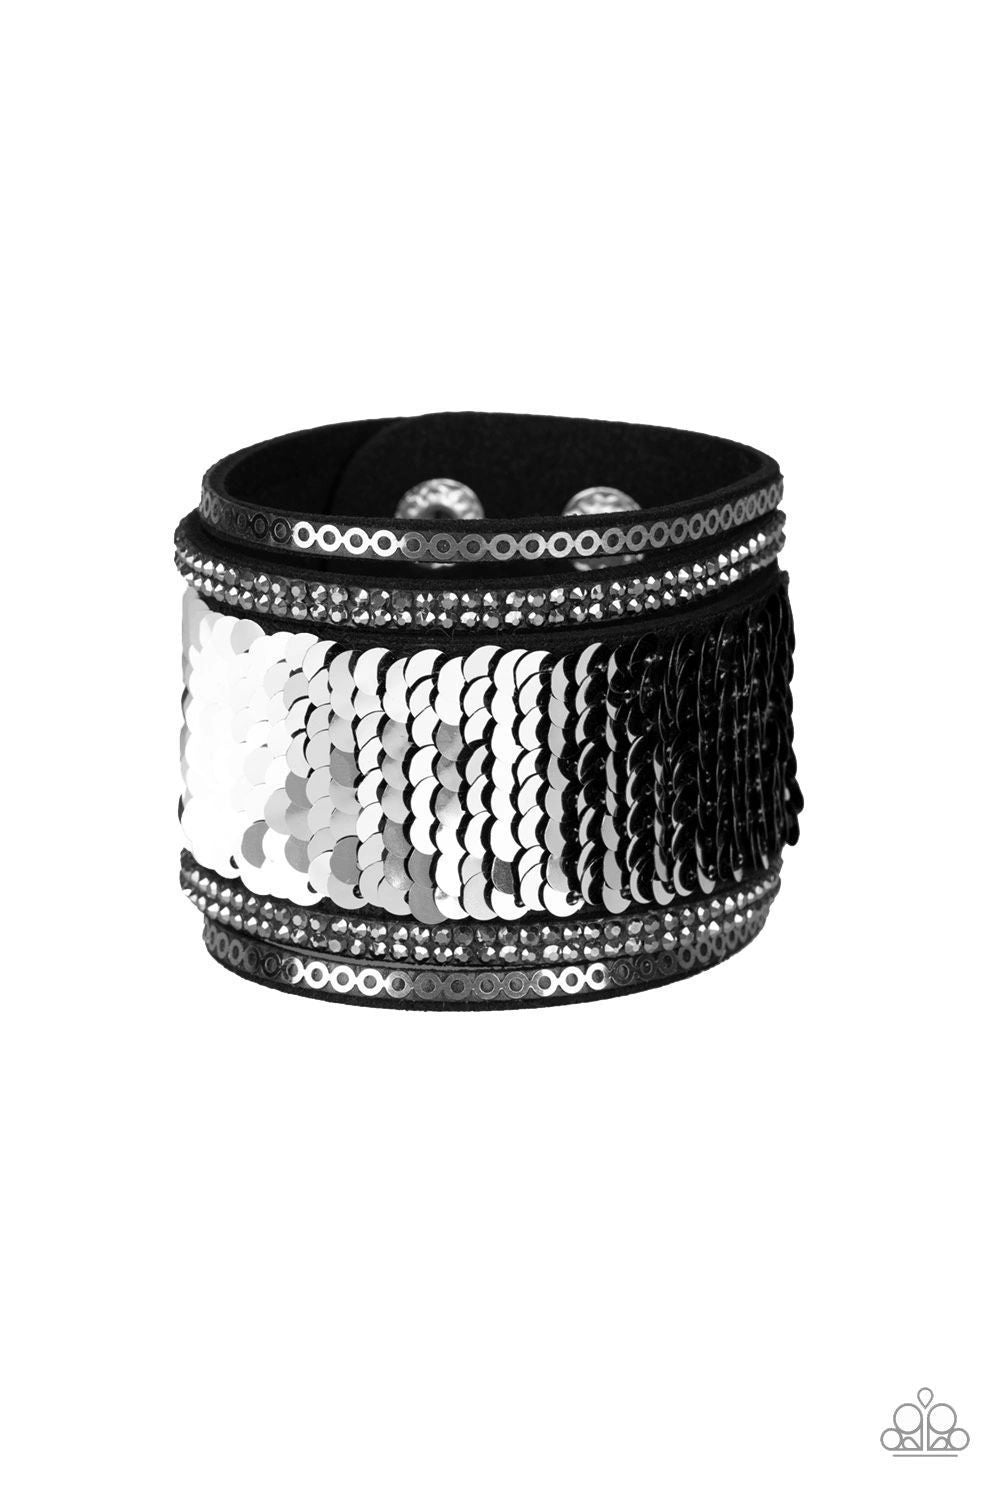 Heads or MERMAID Tails Black and Silver Sequin Reversible Urban Wrap Snap Bracelet - Paparazzi Accessories - reverse-side lightbox -CarasShop.com - $5 Jewelry by Cara Jewels